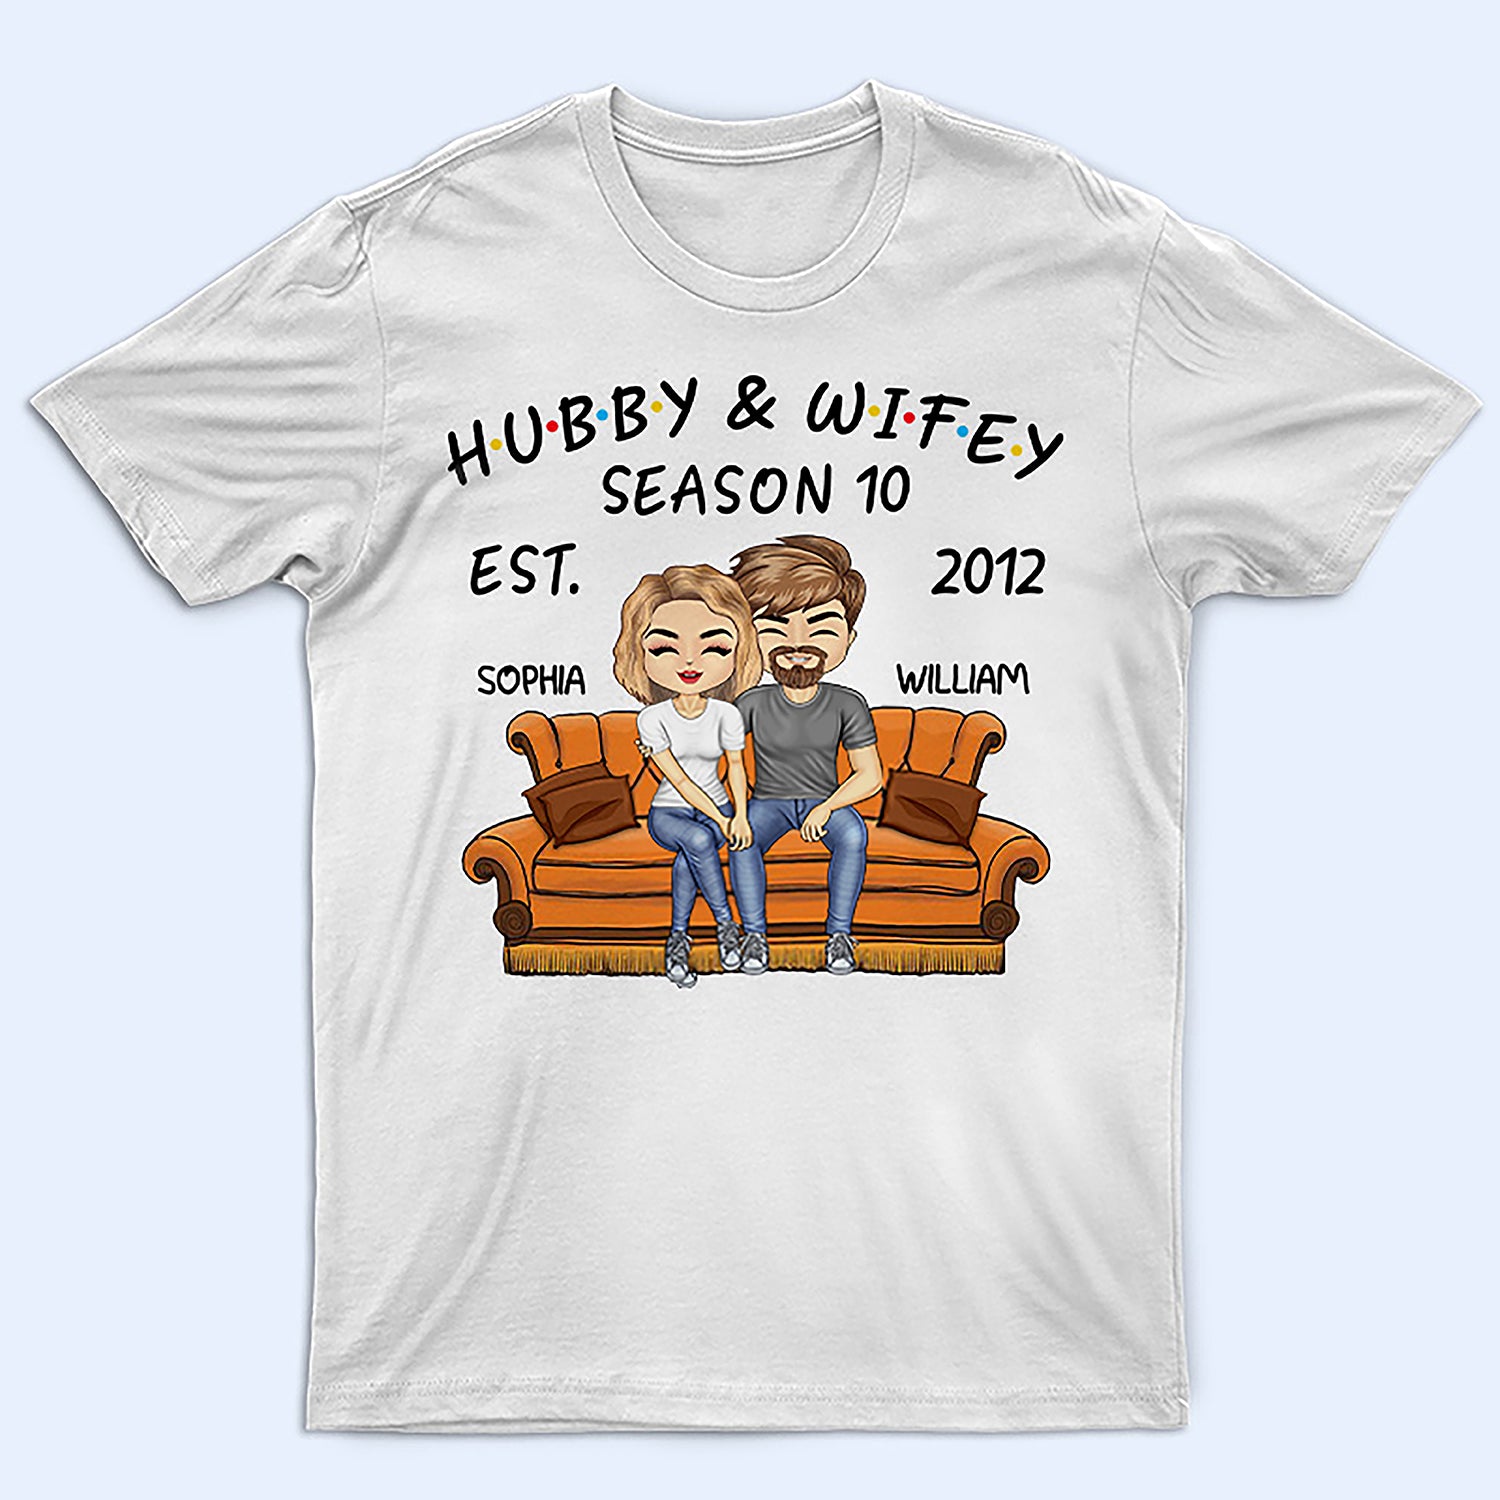 Hubby And Wifey Seasons - Birthday, Anniversary Gift For Spouse, Lover, Husband, Wife, Boyfriend, Girlfriend, Couple - Personalized Custom T Shirt